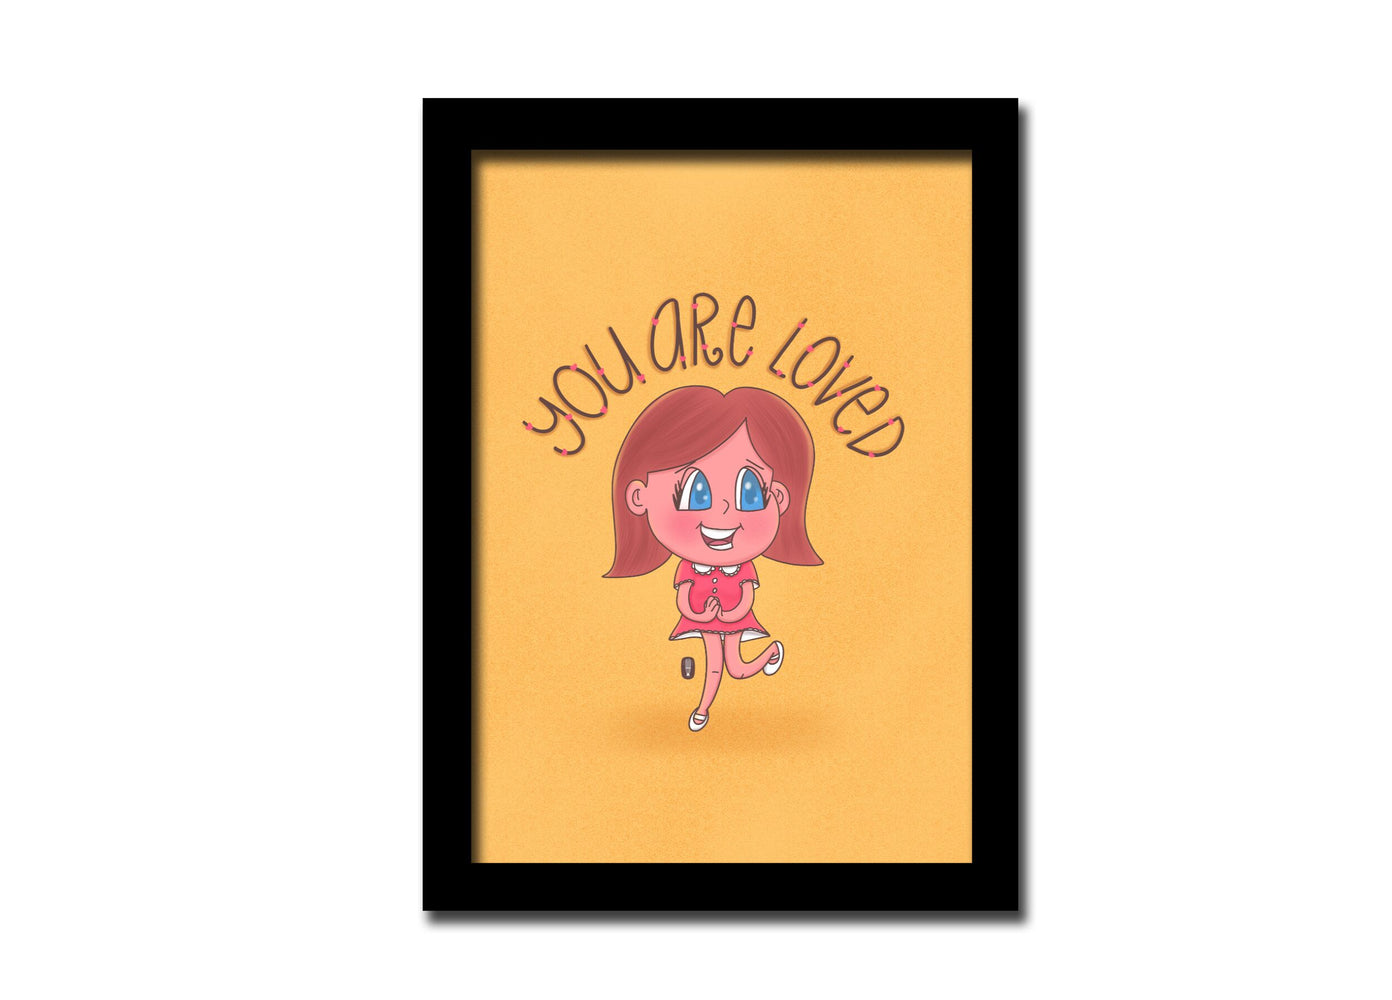 You are loved Frame | A5 size | For desktop and Wall | Comes with a stand and a hook